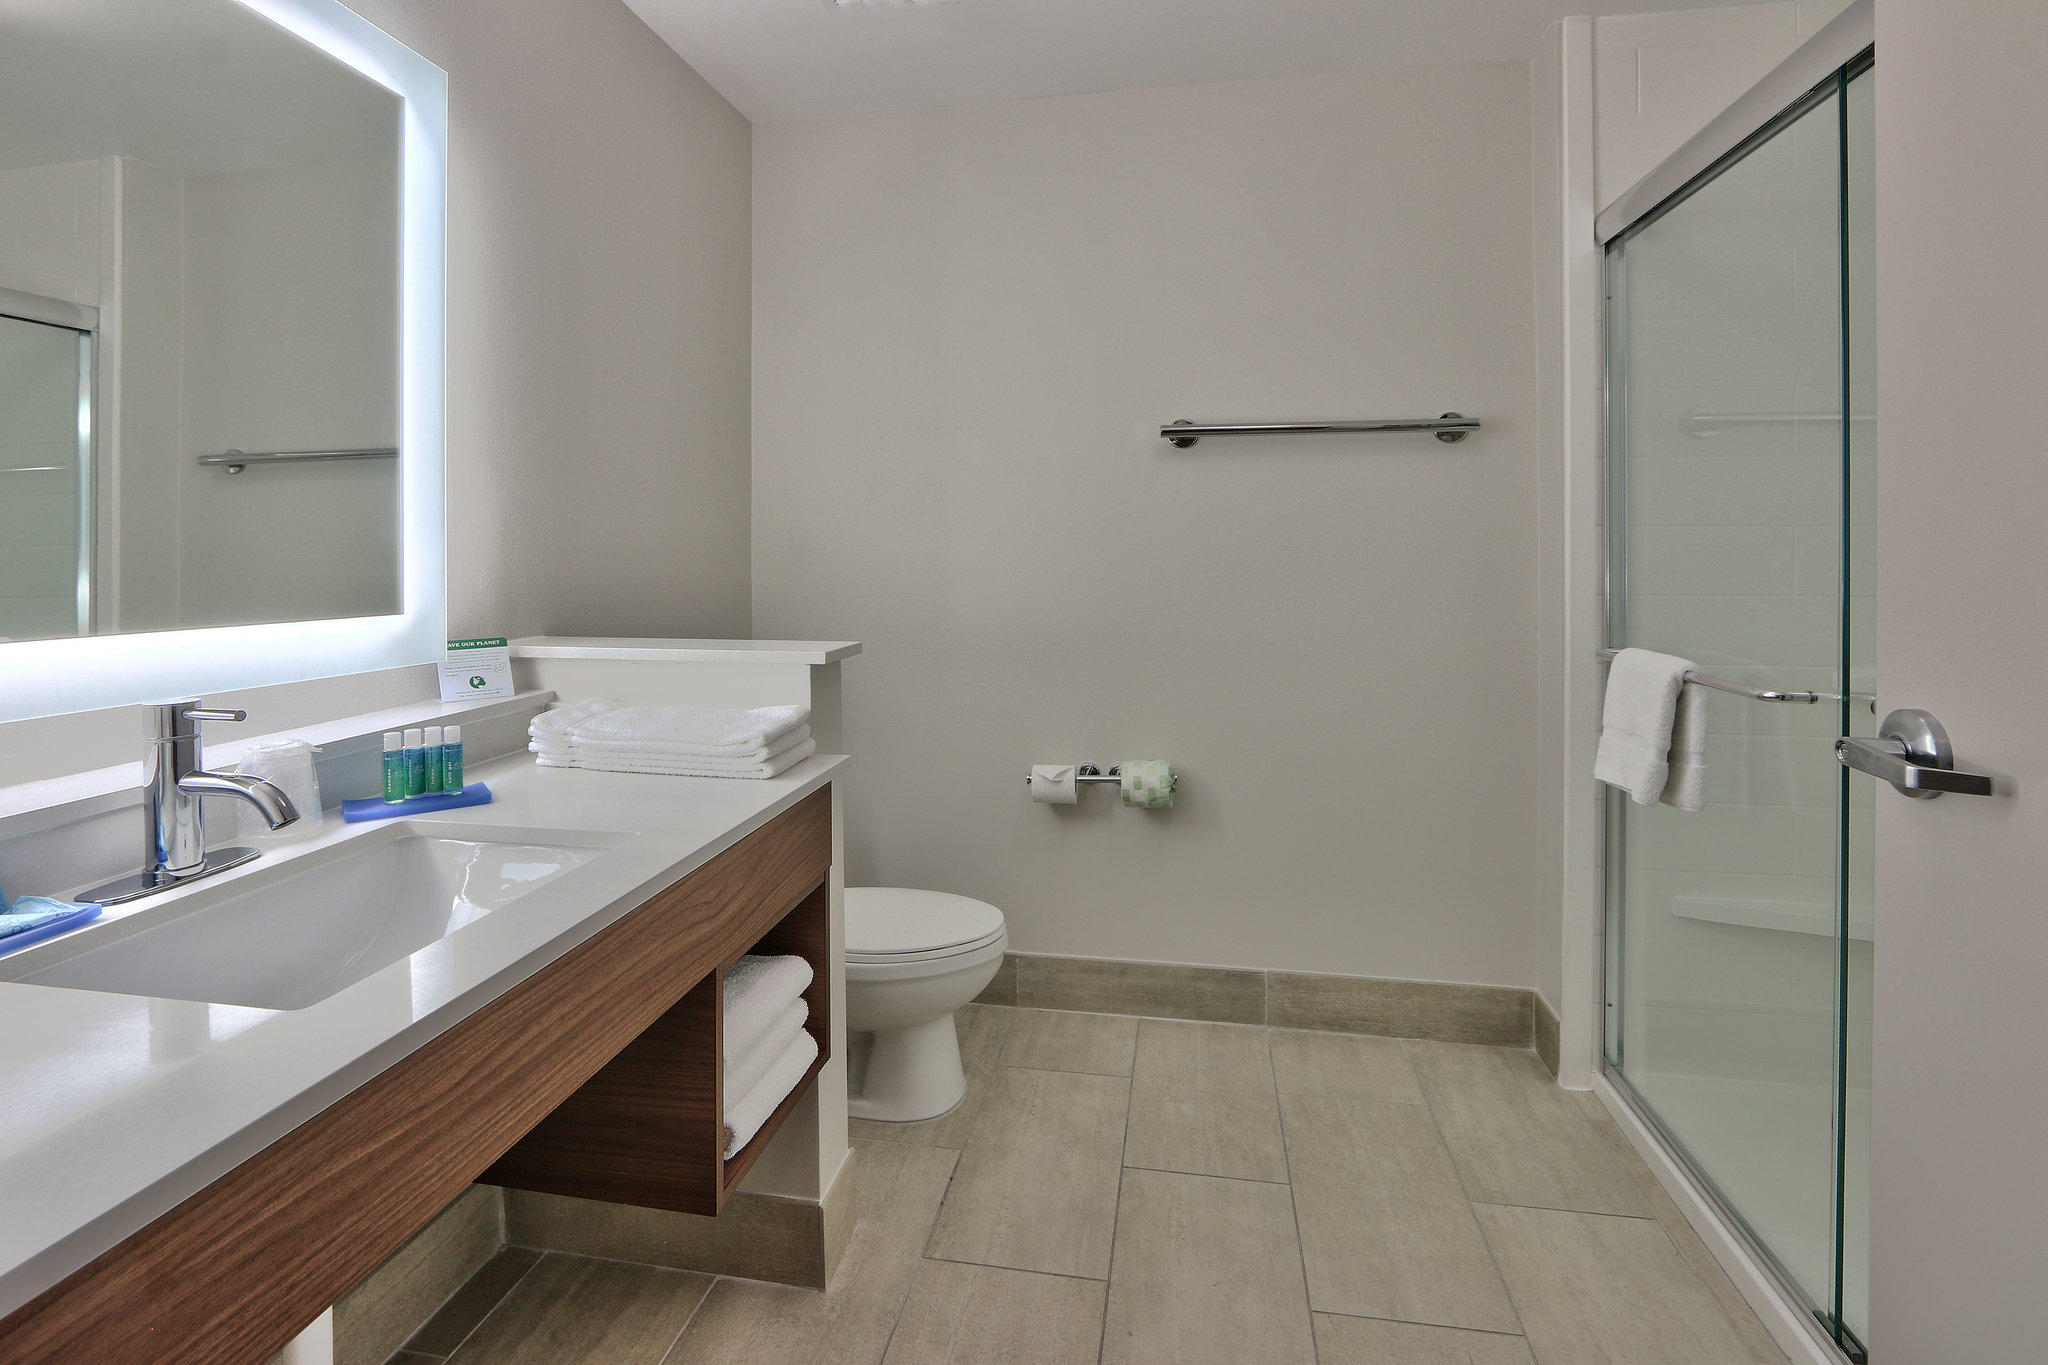 Holiday Inn Express & Suites Houston East - Beltway 8, an IHG Hotel